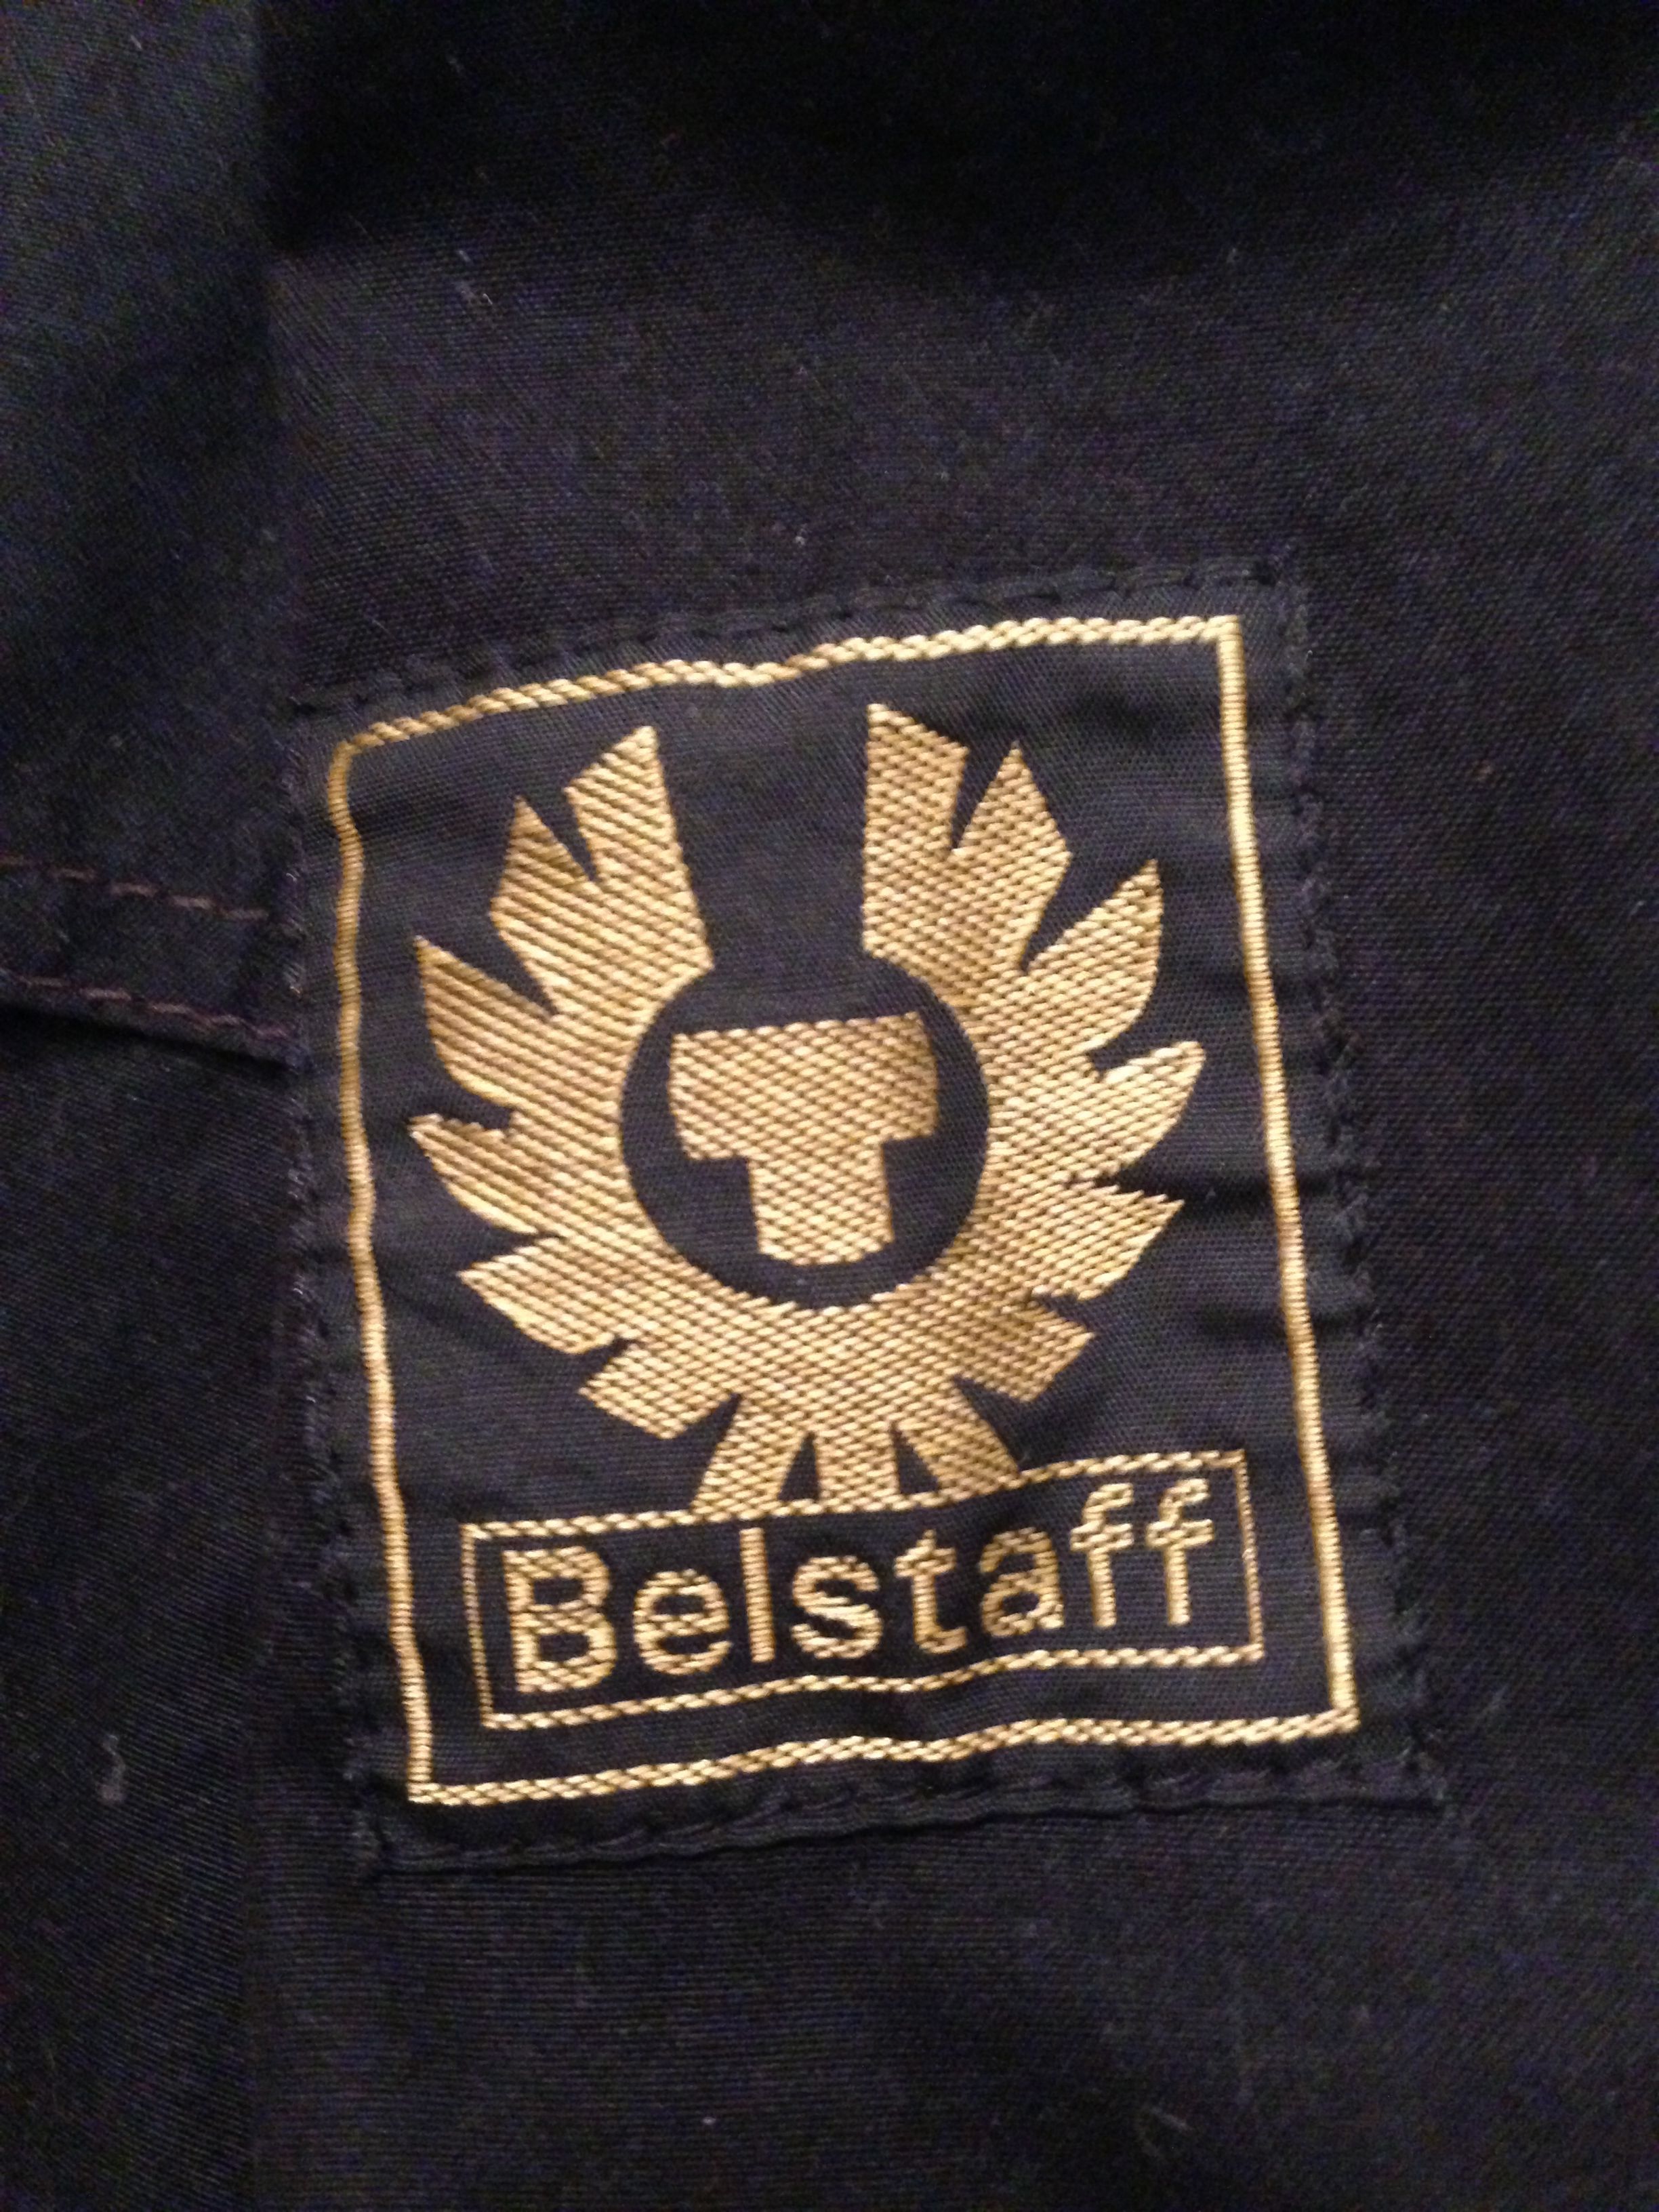 Another Belstaff "real or fake" tread | Styleforum